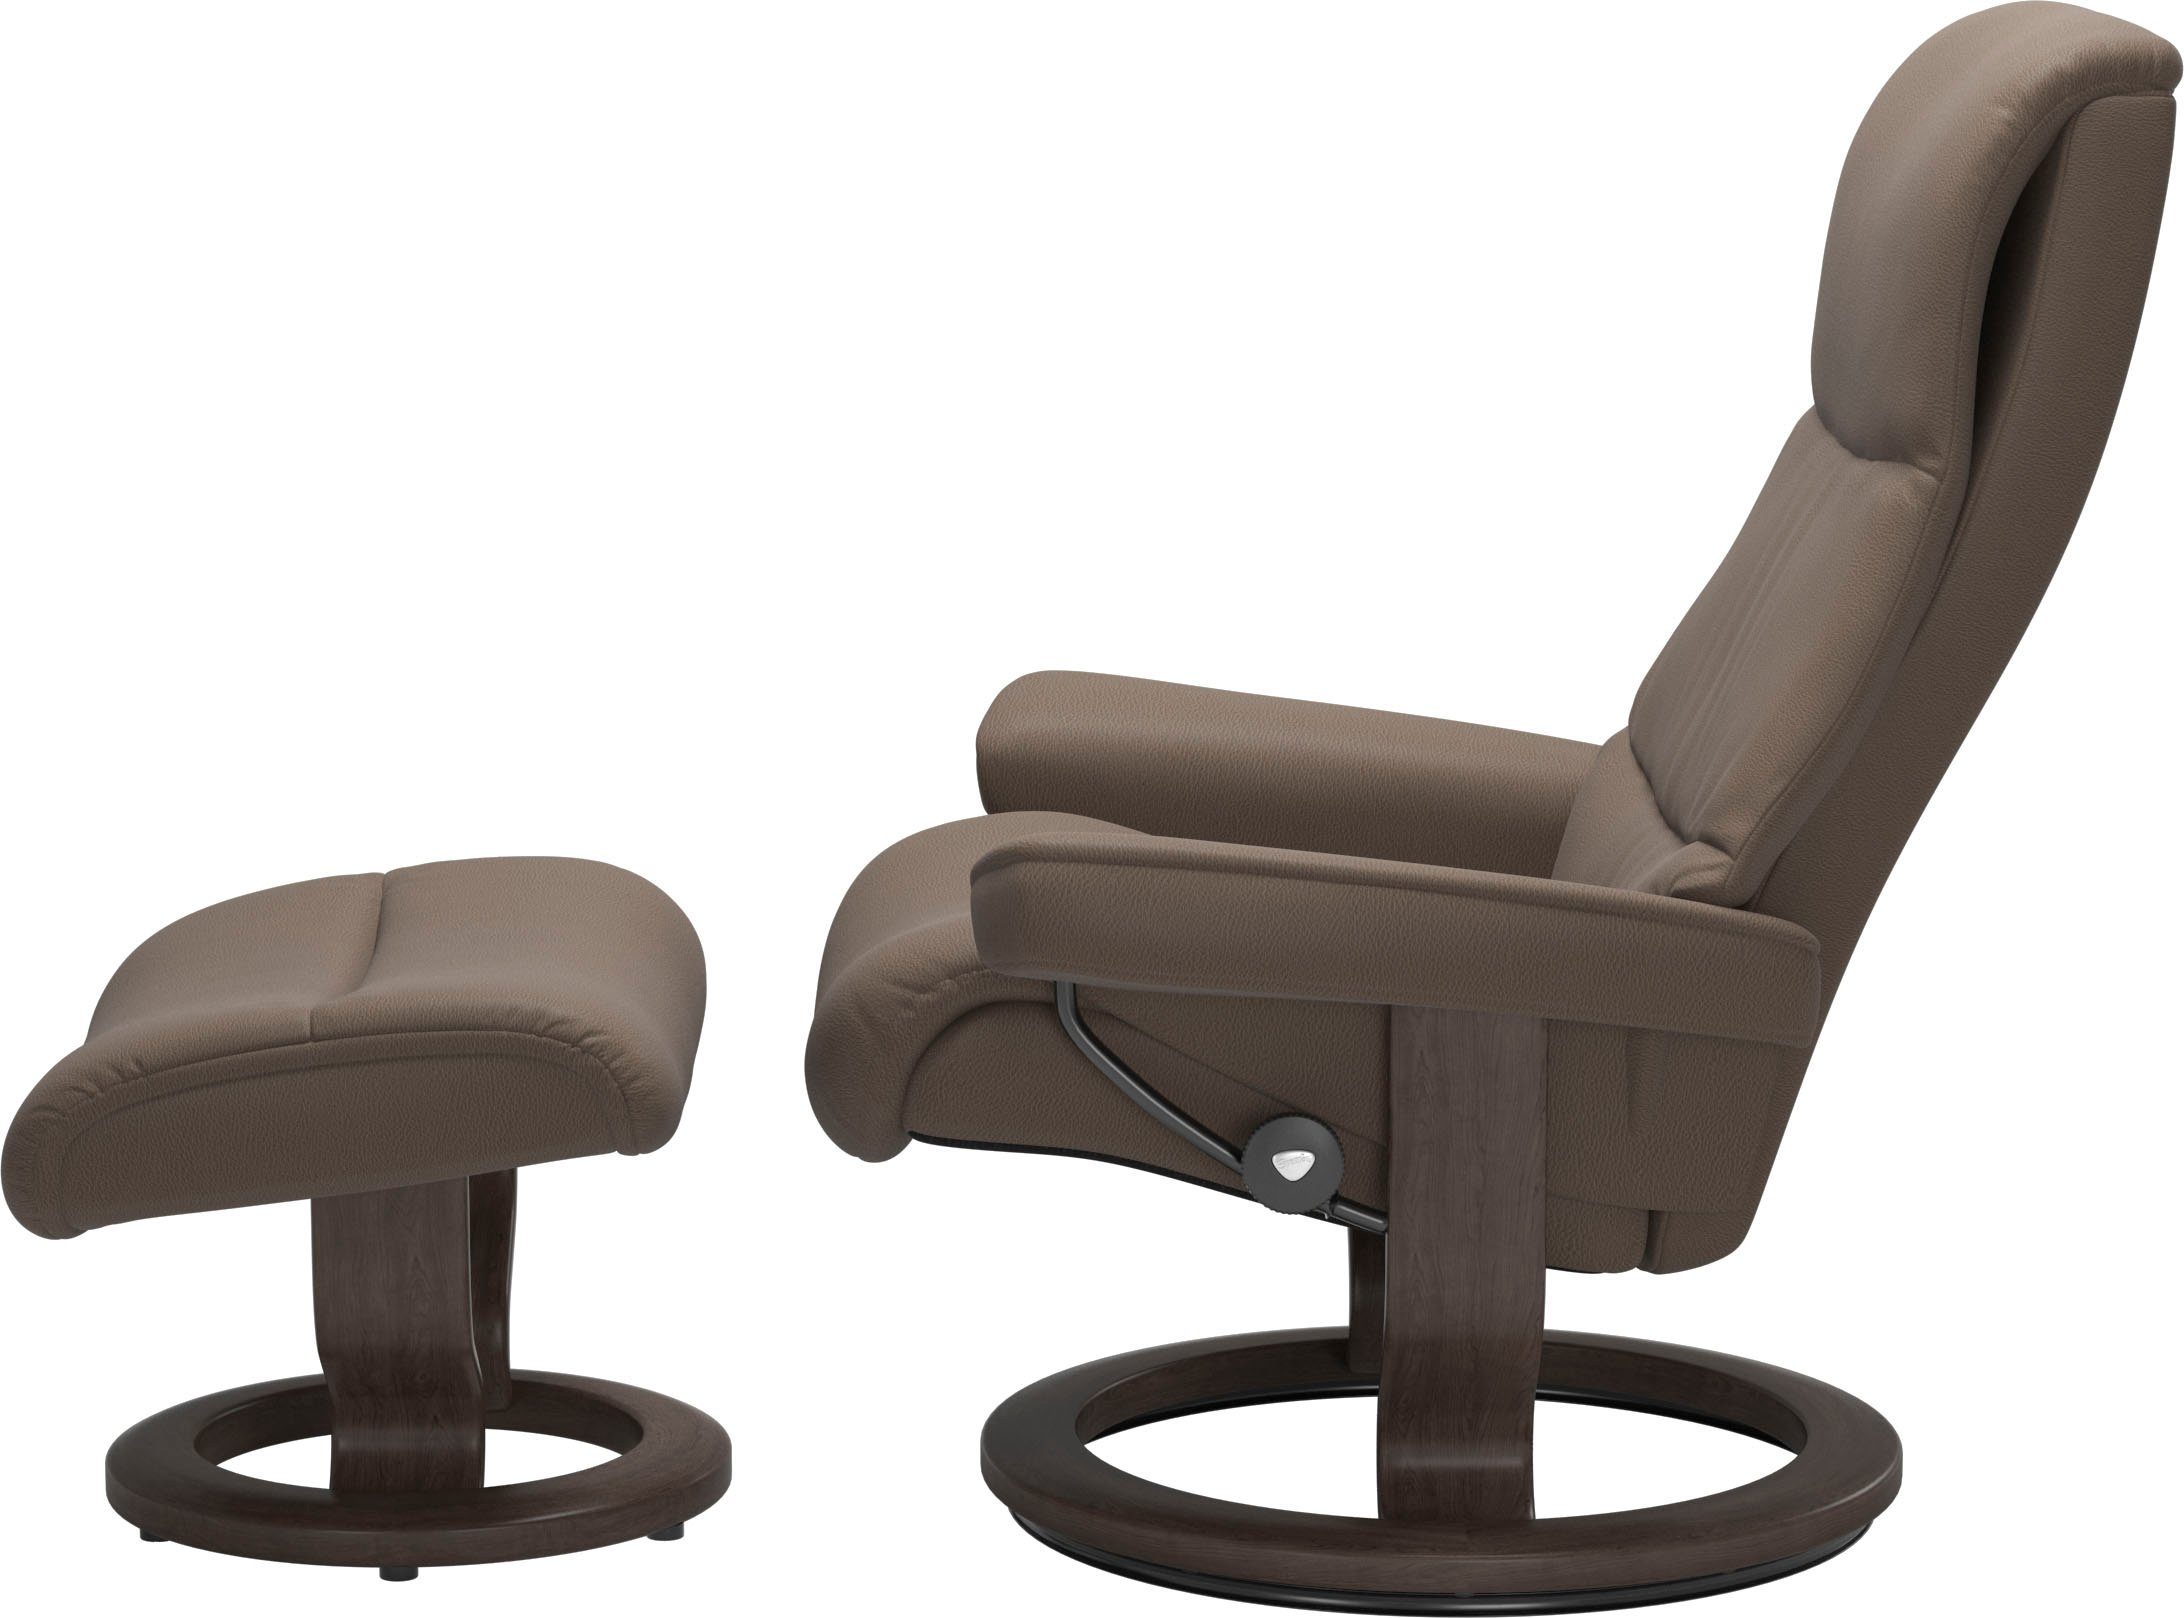 Stressless® Relaxsessel View, mit Base, Wenge Größe Classic S,Gestell